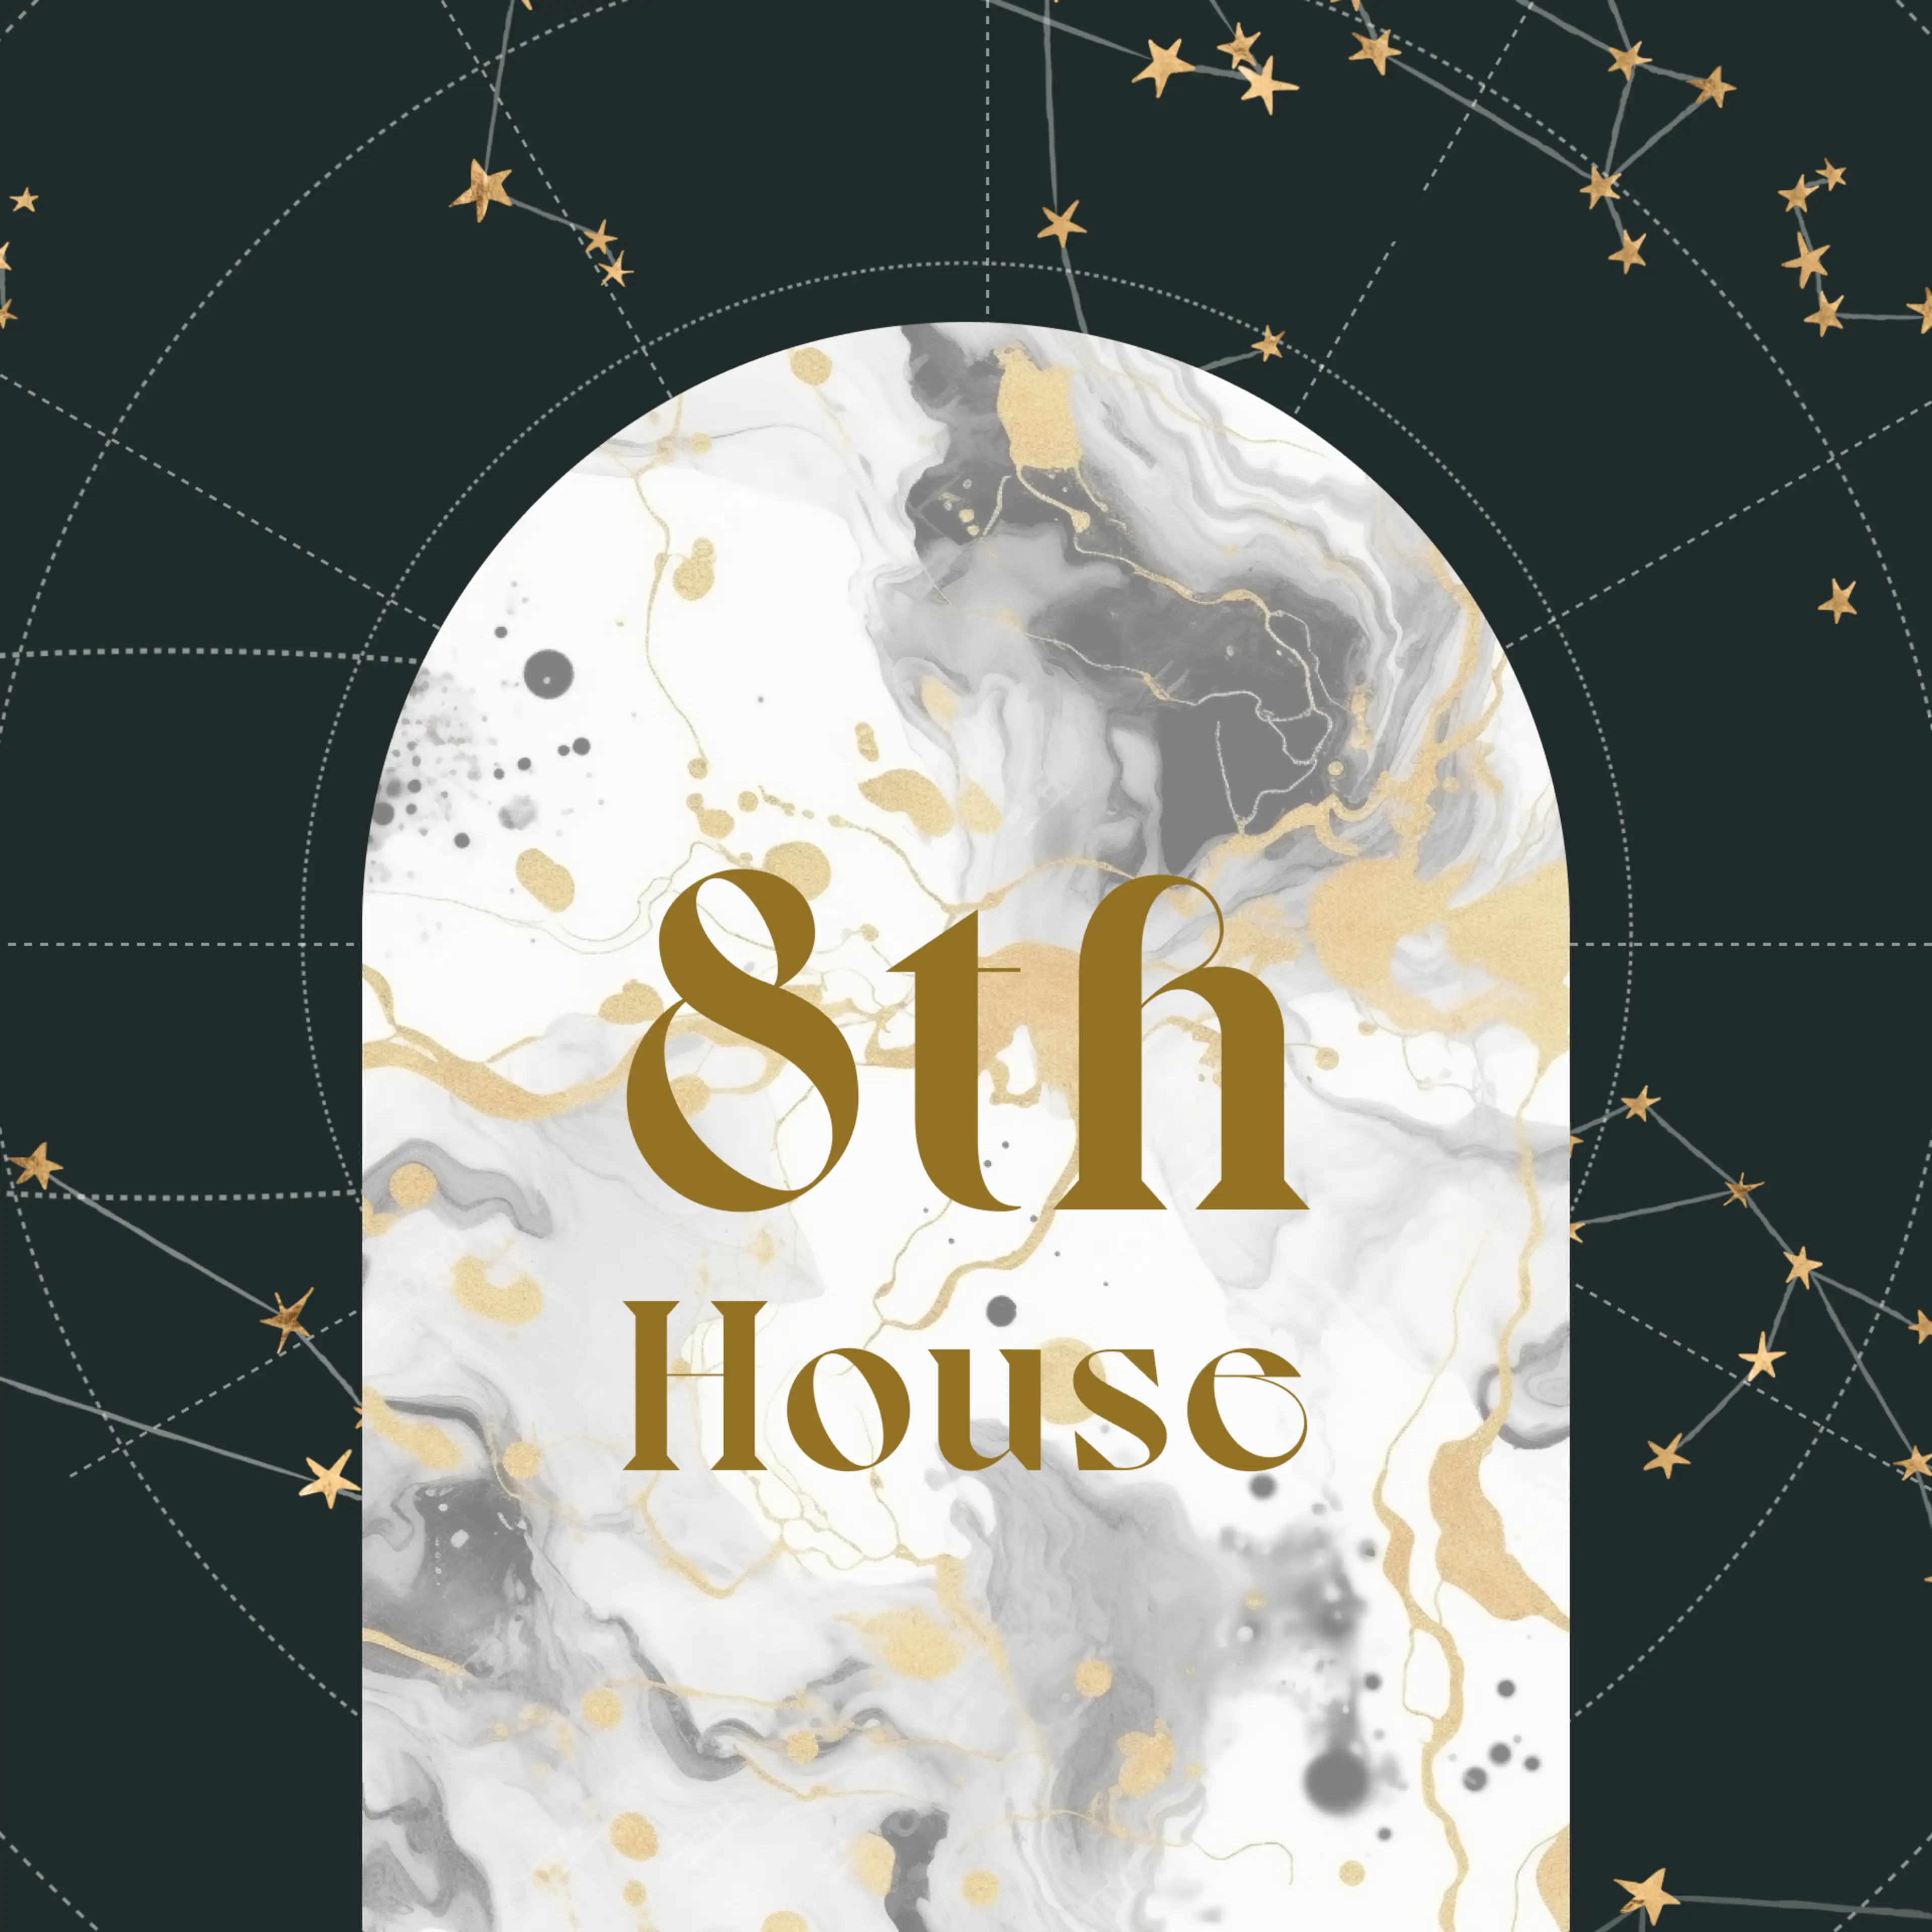 Eighth House in Astrology